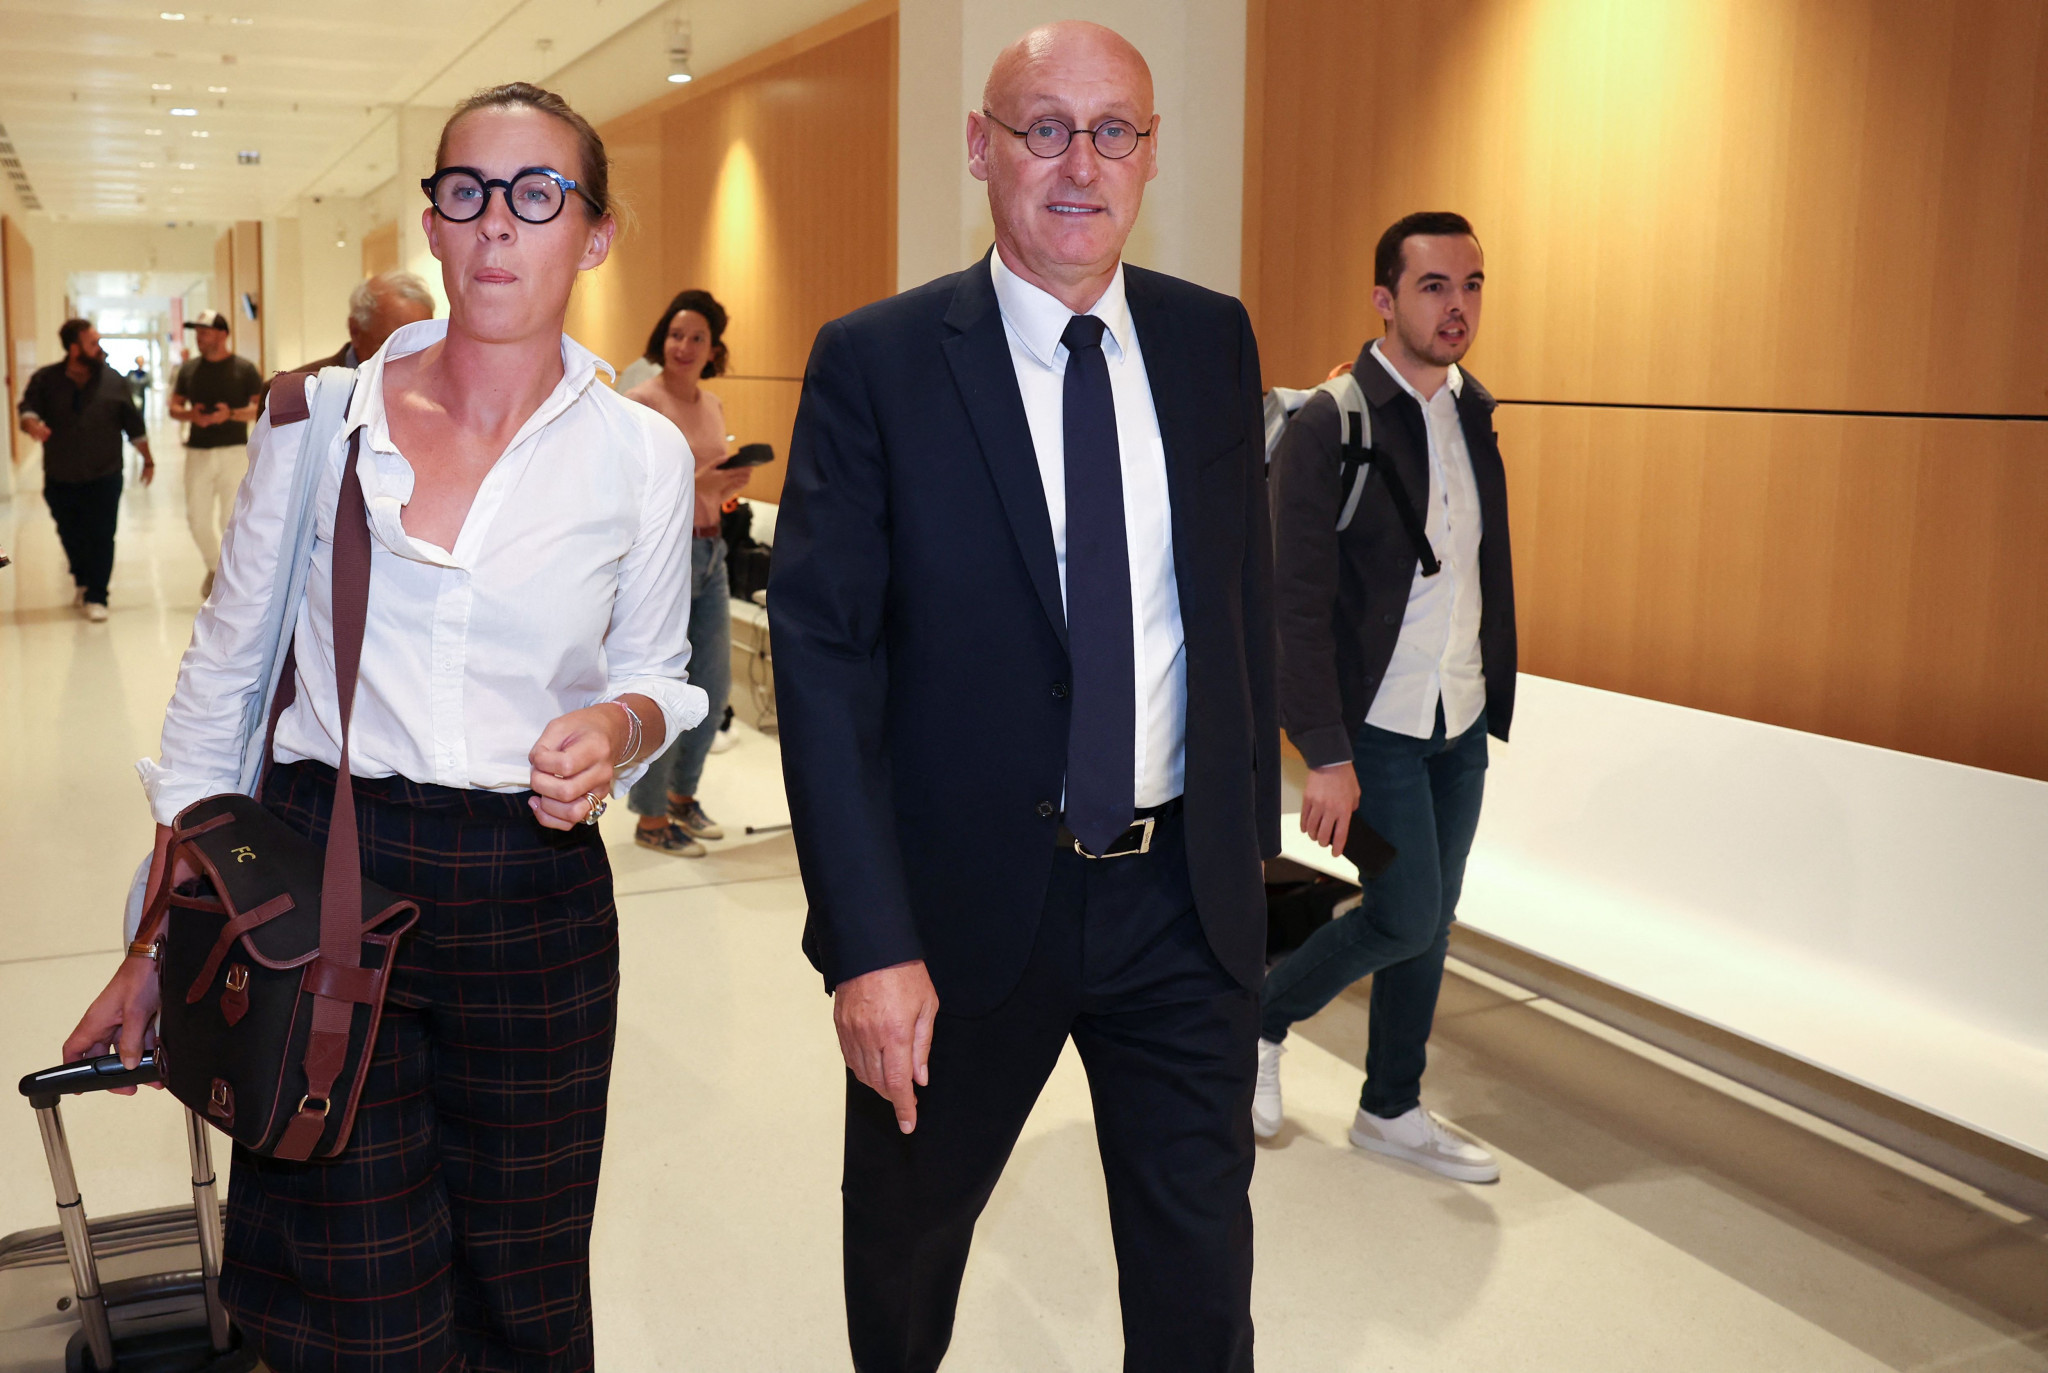 Plaintiffs call for FFR President Laporte to be given three-year jail sentence